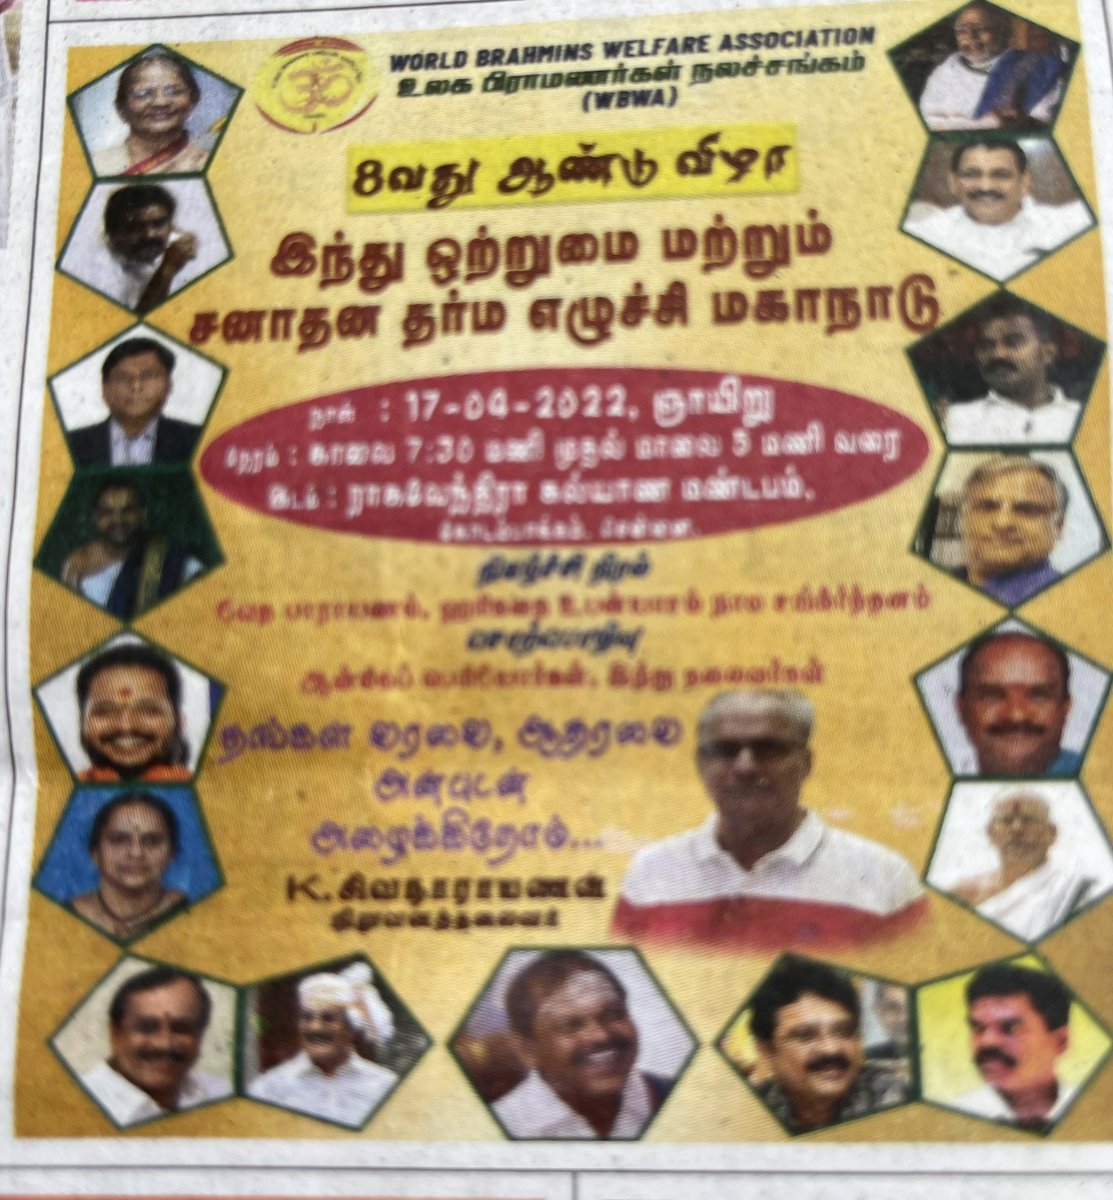 1% rule the country 85% support them for themselves to be slavery. Think for ourselves. See their cooperation…@satyenaiadmk @mkstalin @sukrivdharmesh @OshoJanakiram @HaneyMani #Chennai #MBC #Ambedkar #vck